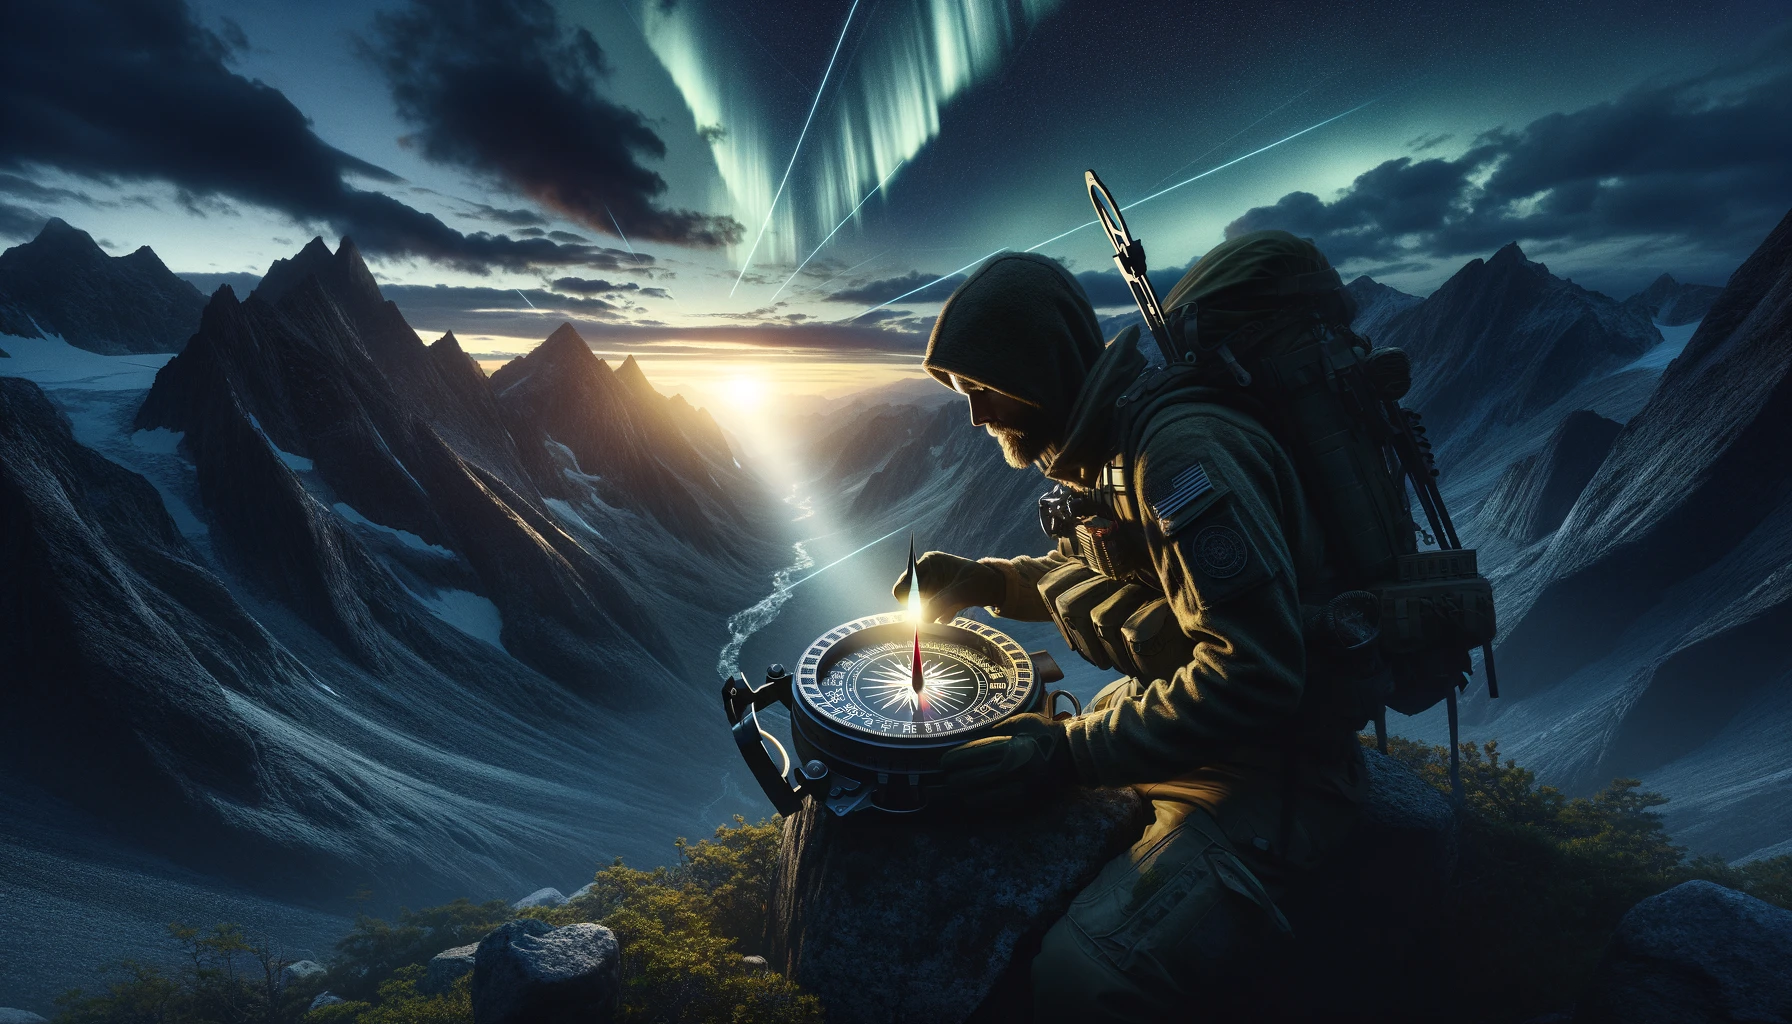 Prepper aligns compass between magnetic north and true north in rugged mountains at dusk, with aurora-like visuals and Polaris's beam guiding, epitomizing precision navigation in wilderness